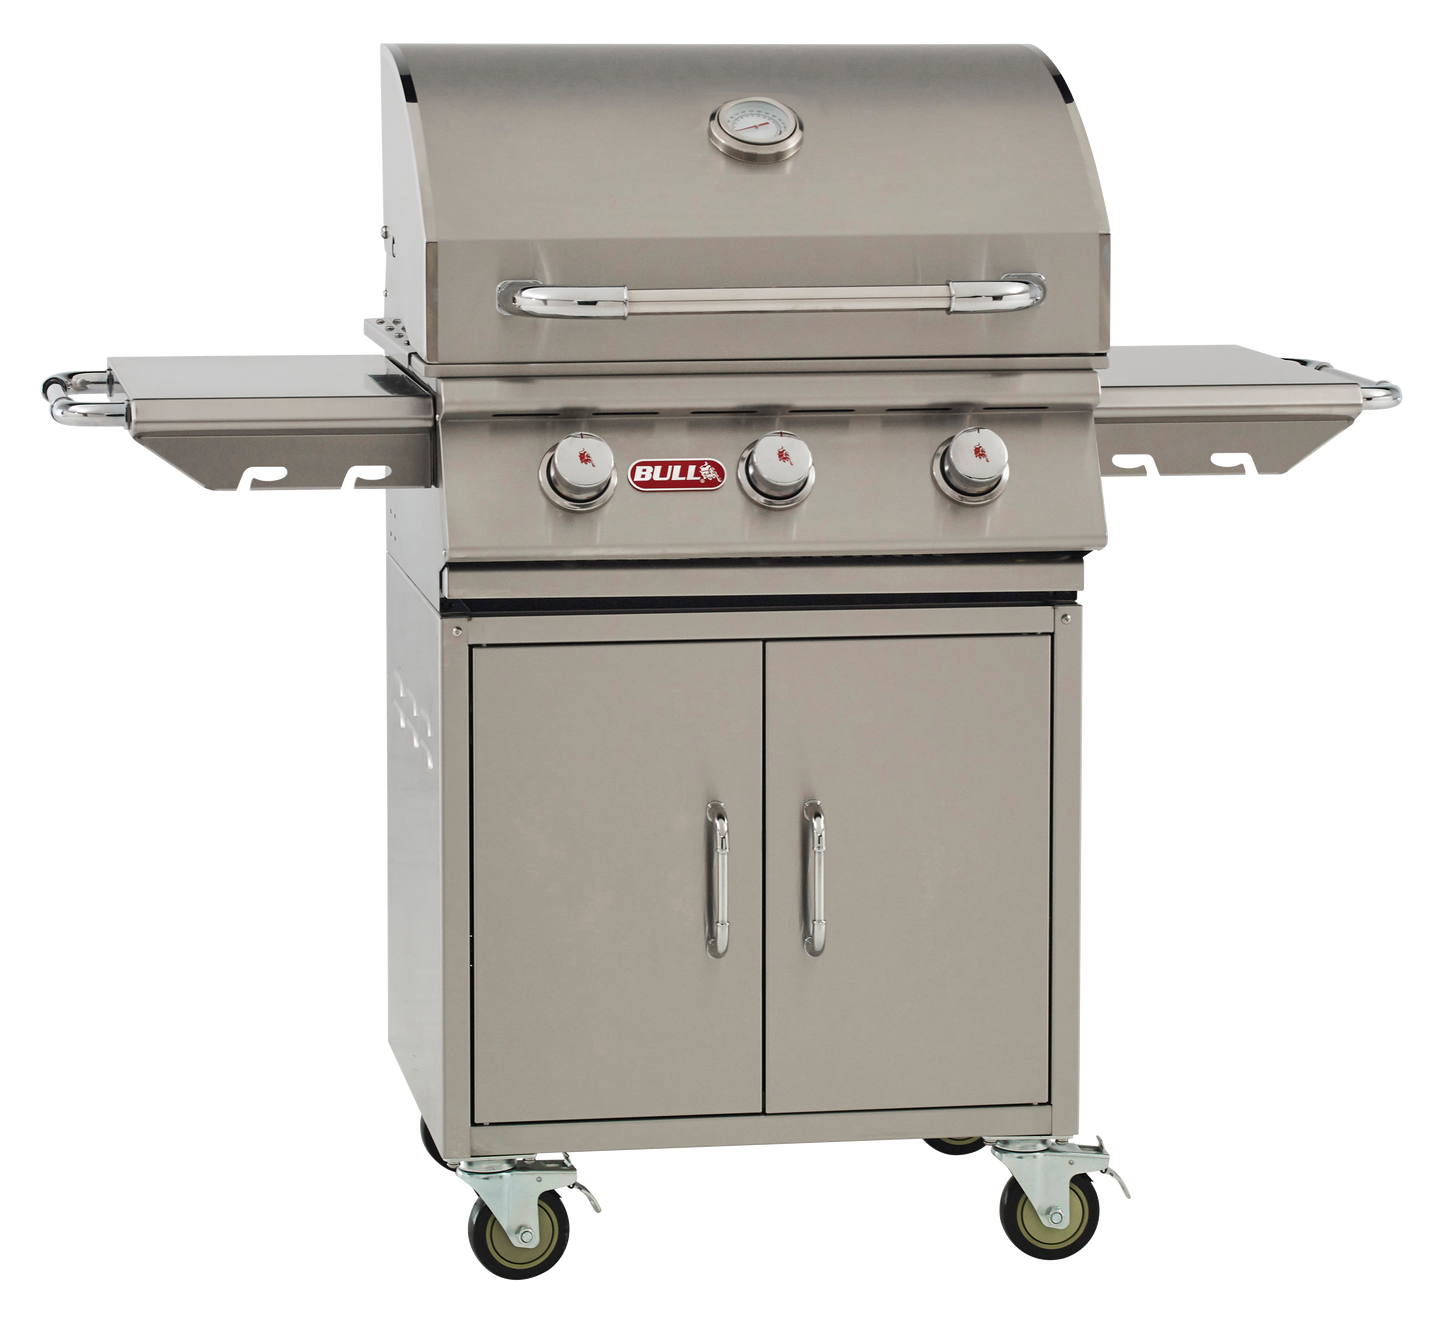 Bull Steer 24 Inch Propane Gas Grill on Cart